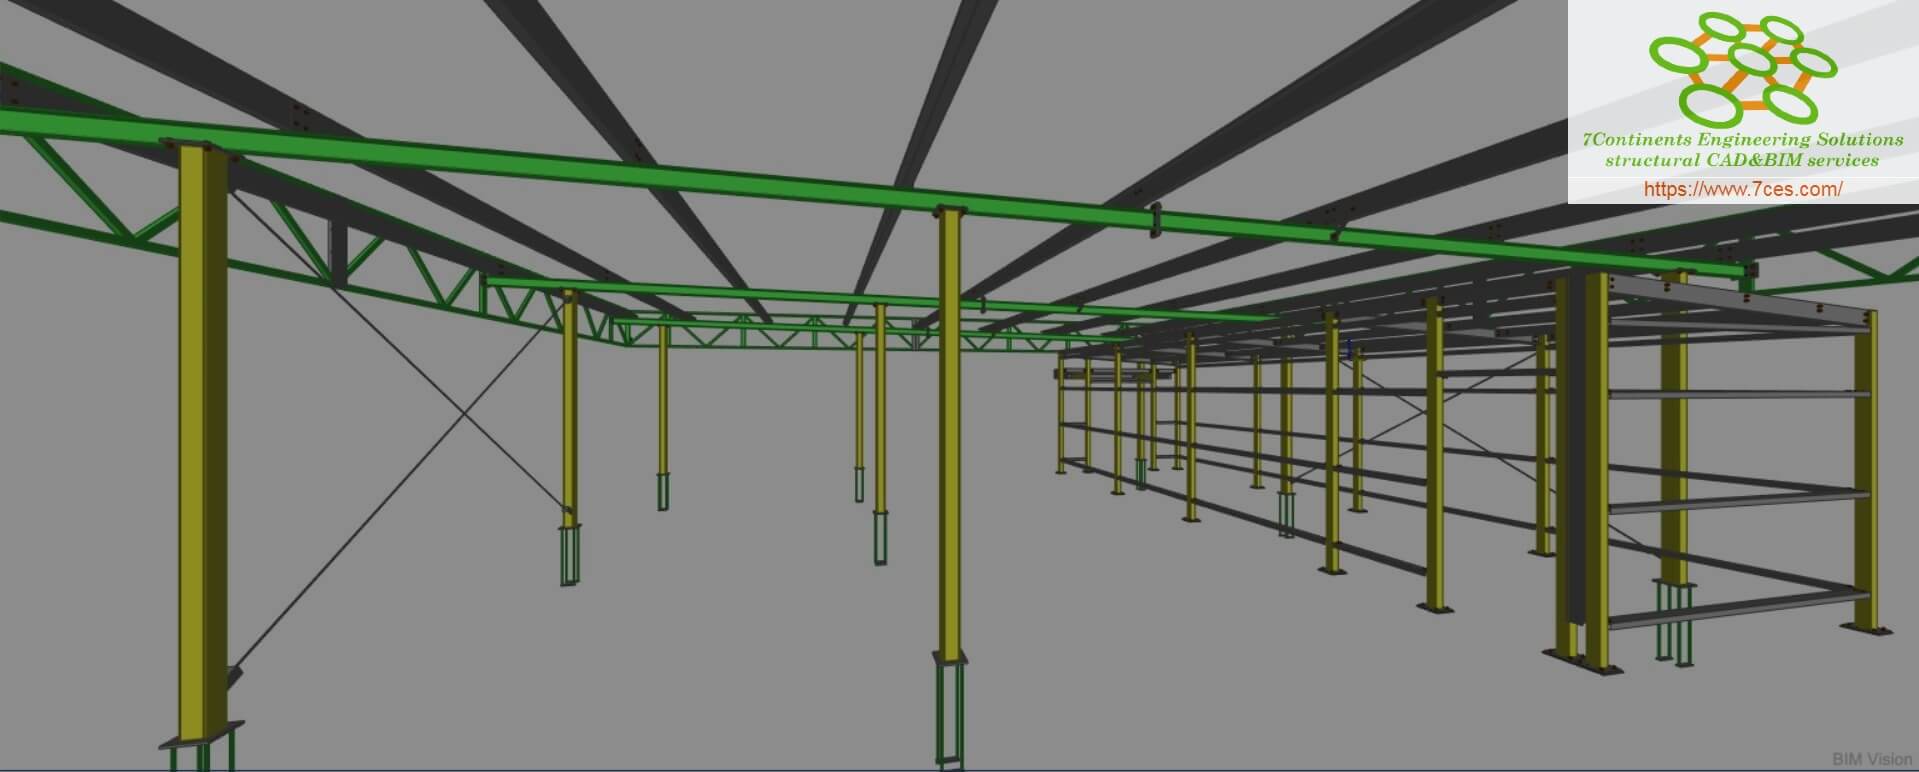 Importance of Structural Steel Detailing in Steel Construction